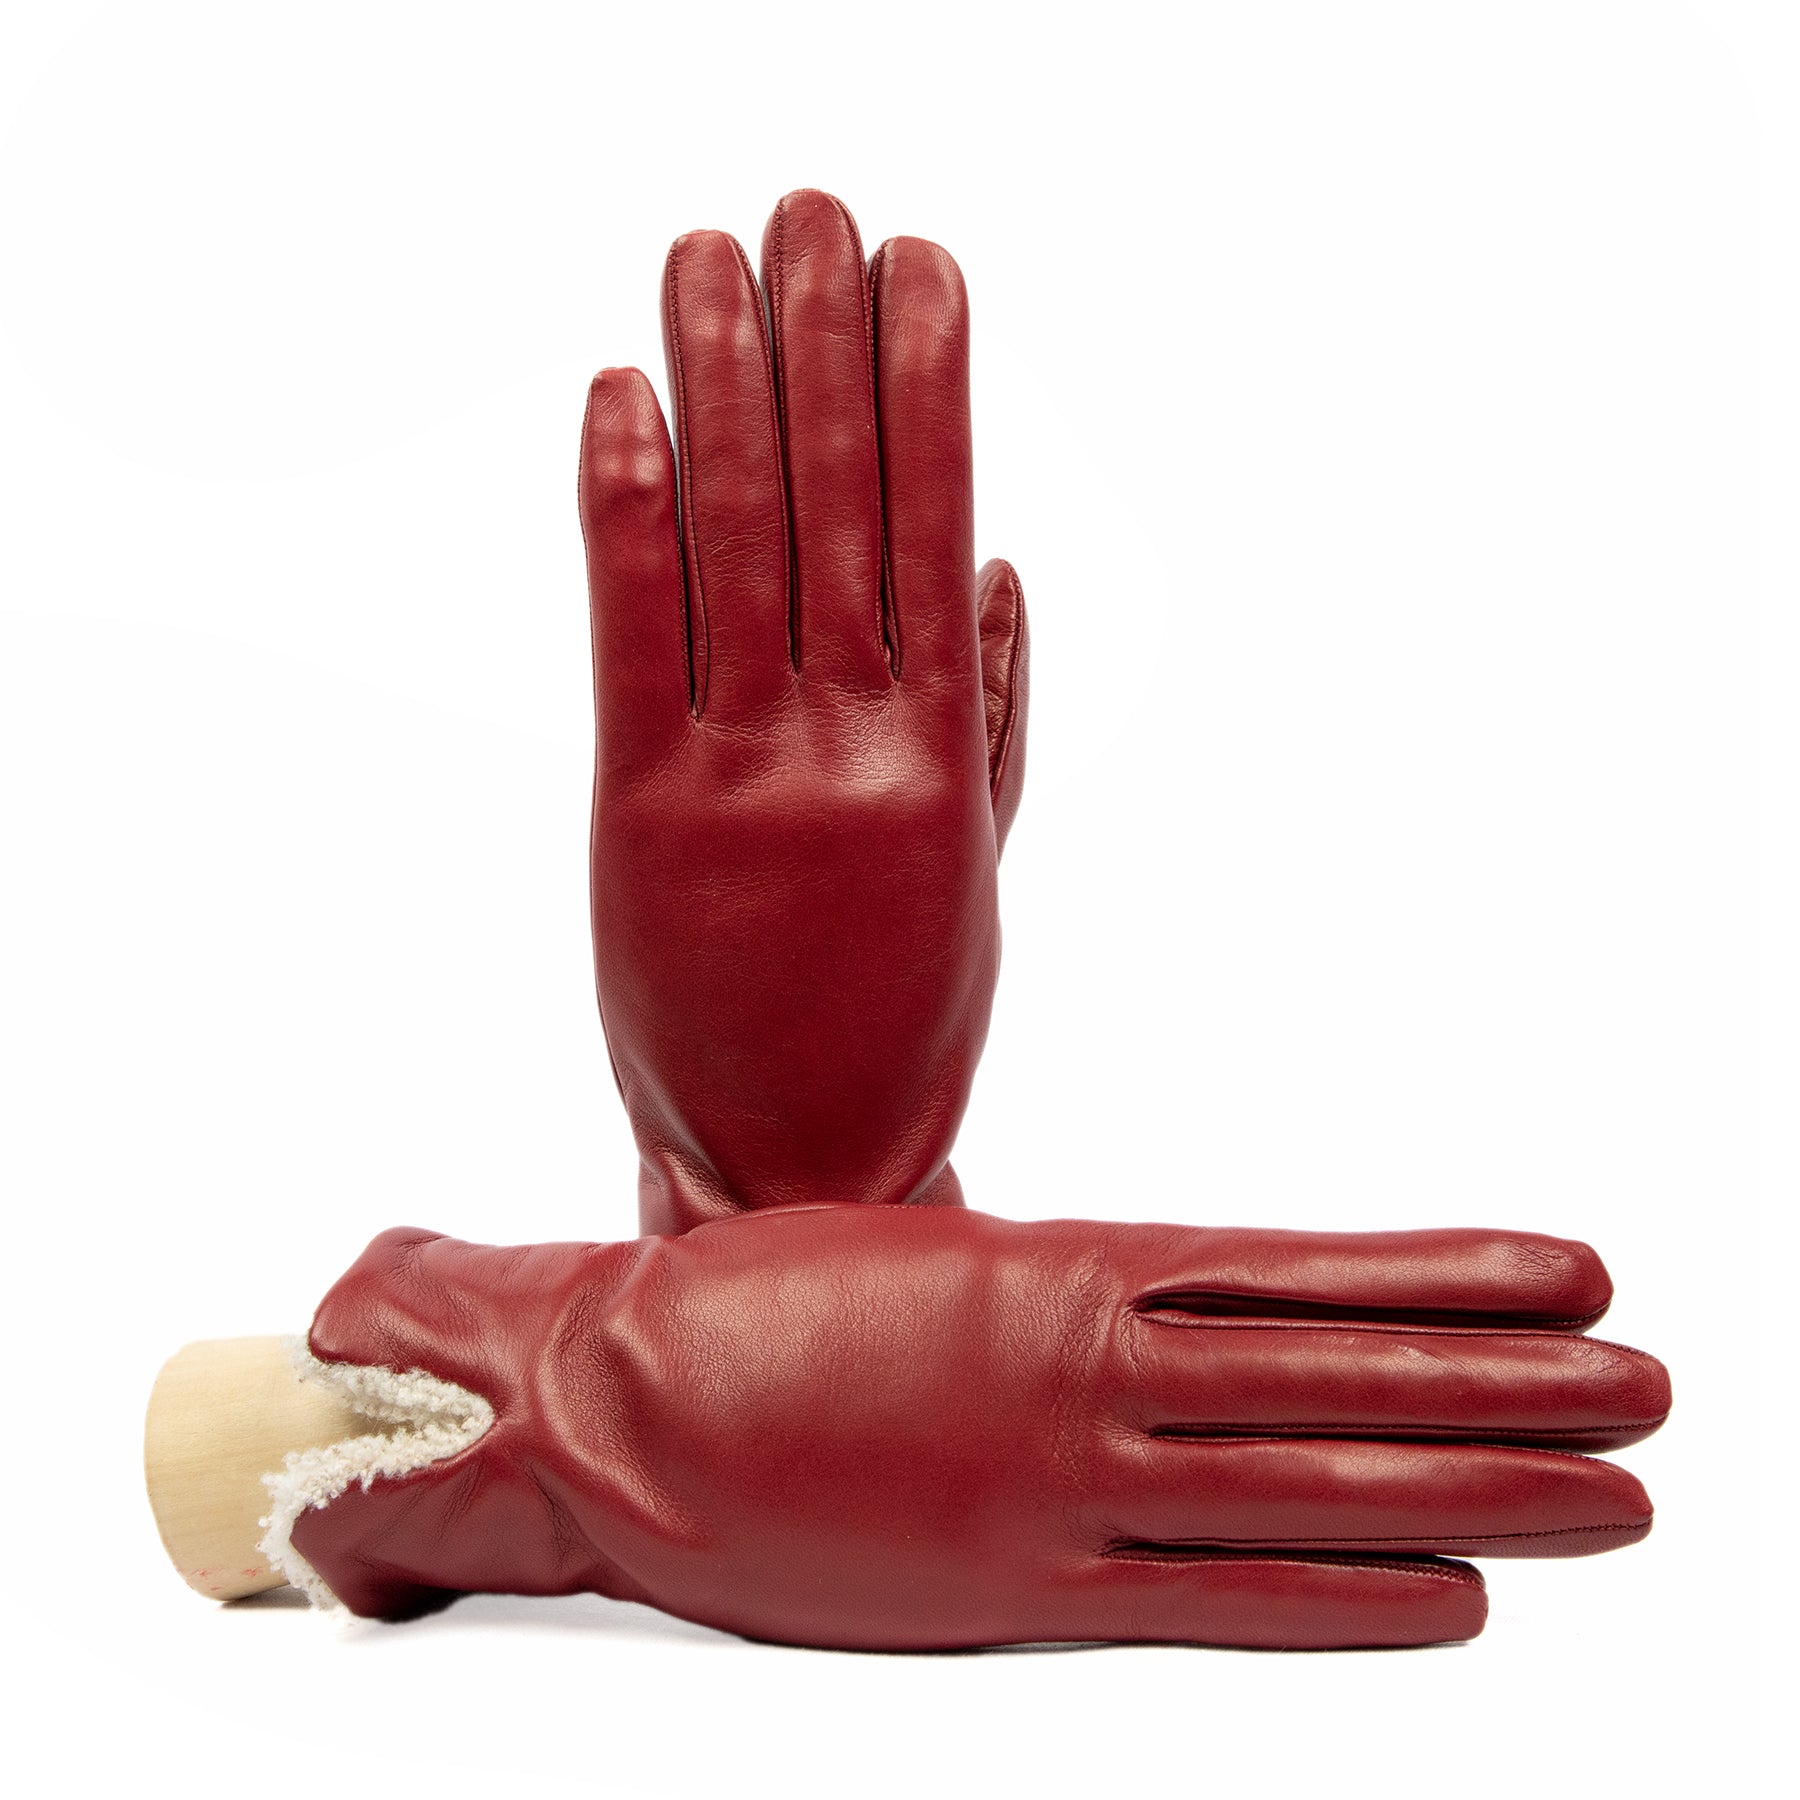 Women's burgundy nappa leather gloves with shearling cuff